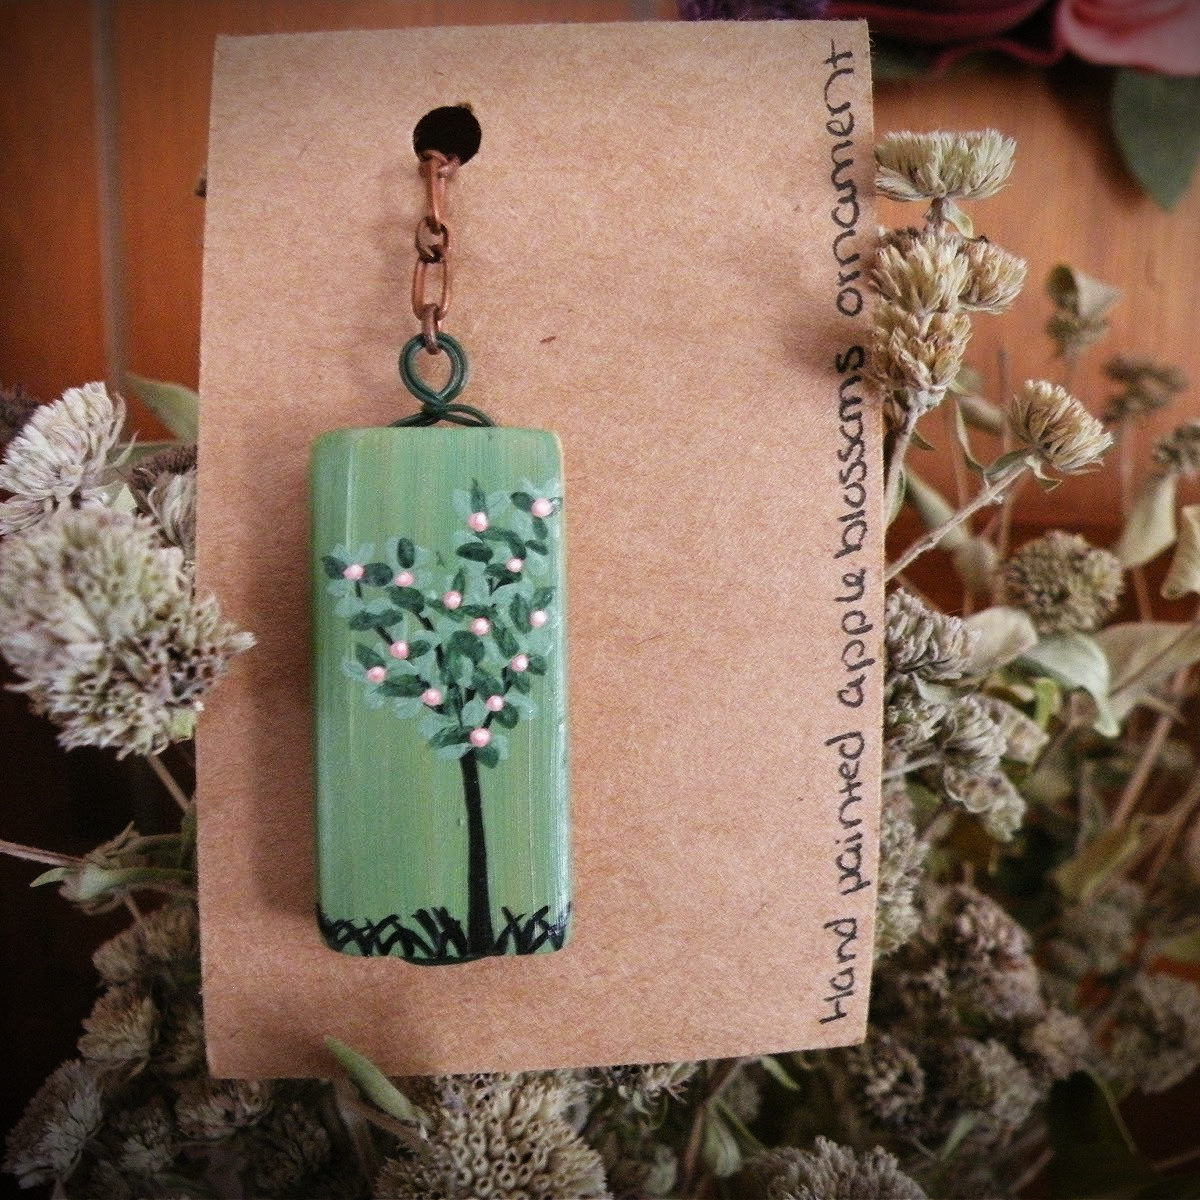 Spring Blossom Hand Painted Ornament